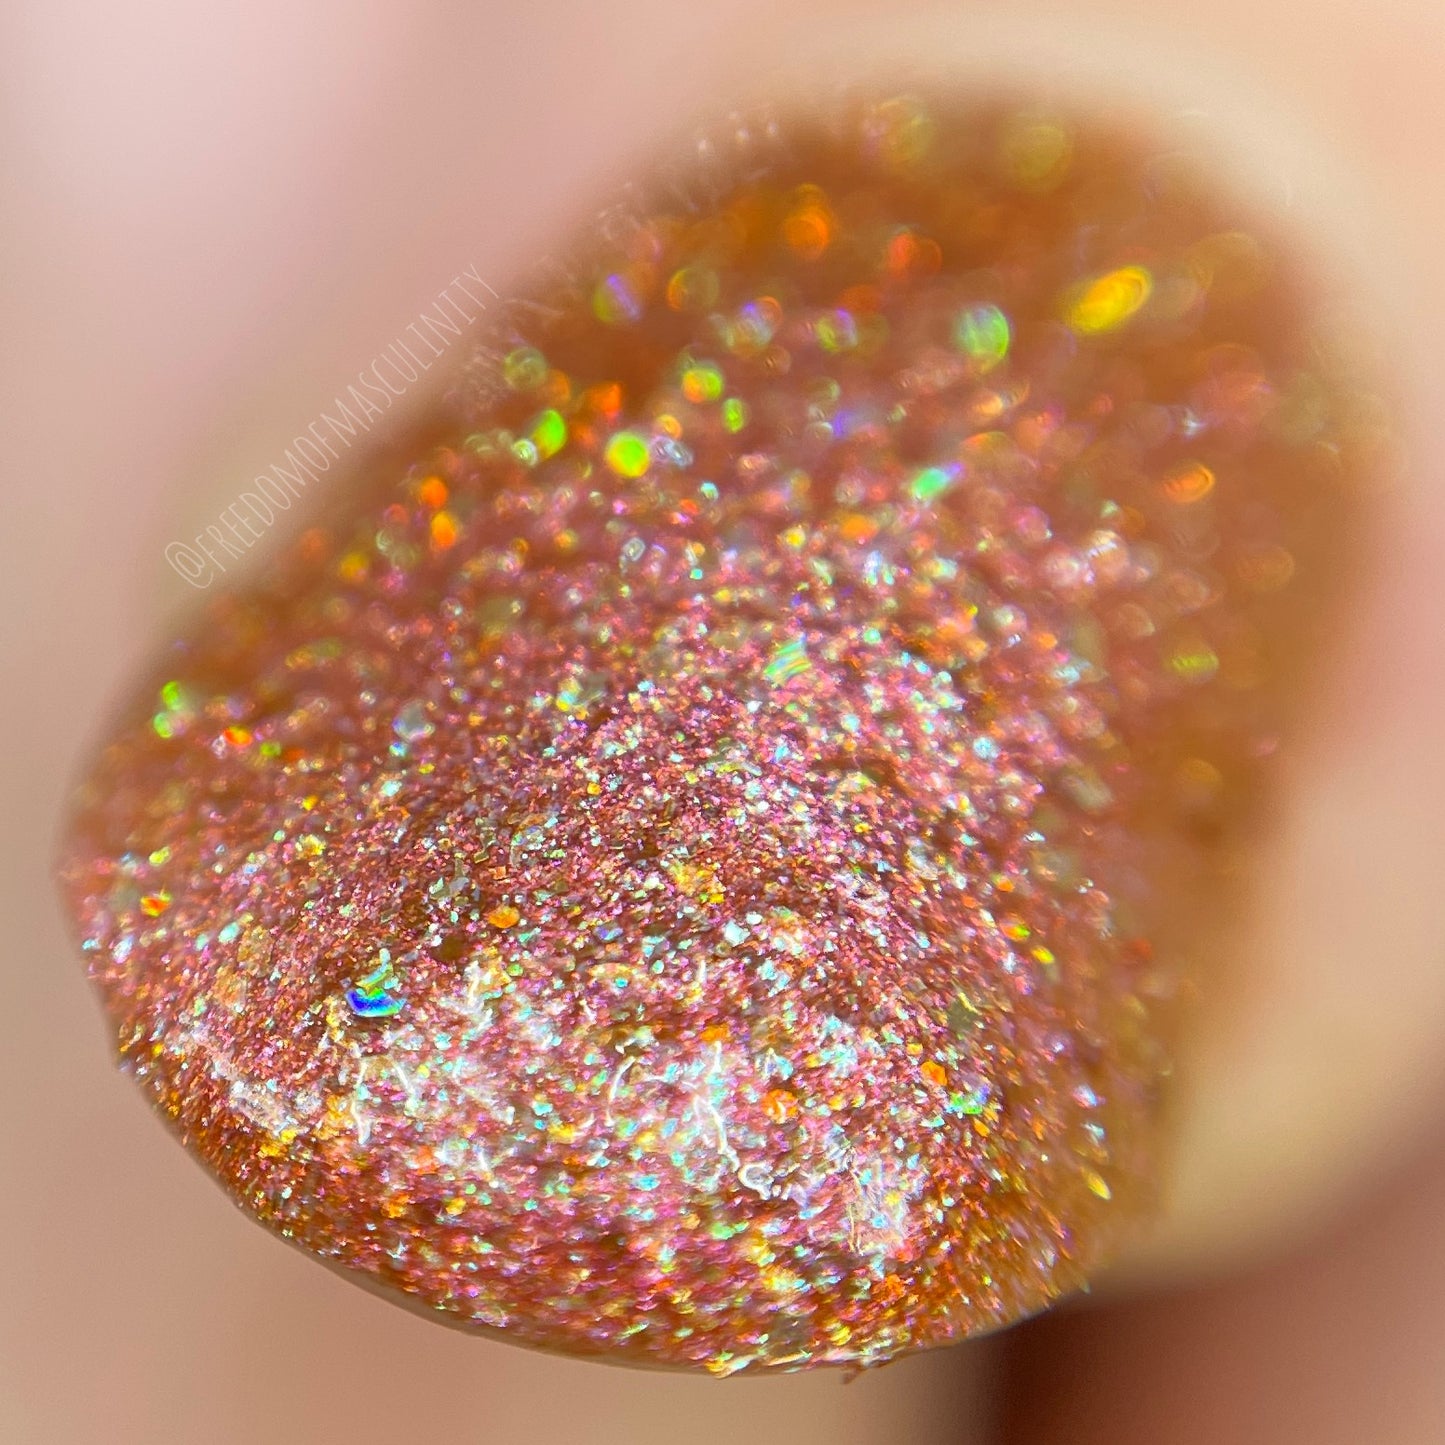 Booger's holographic glitter detail